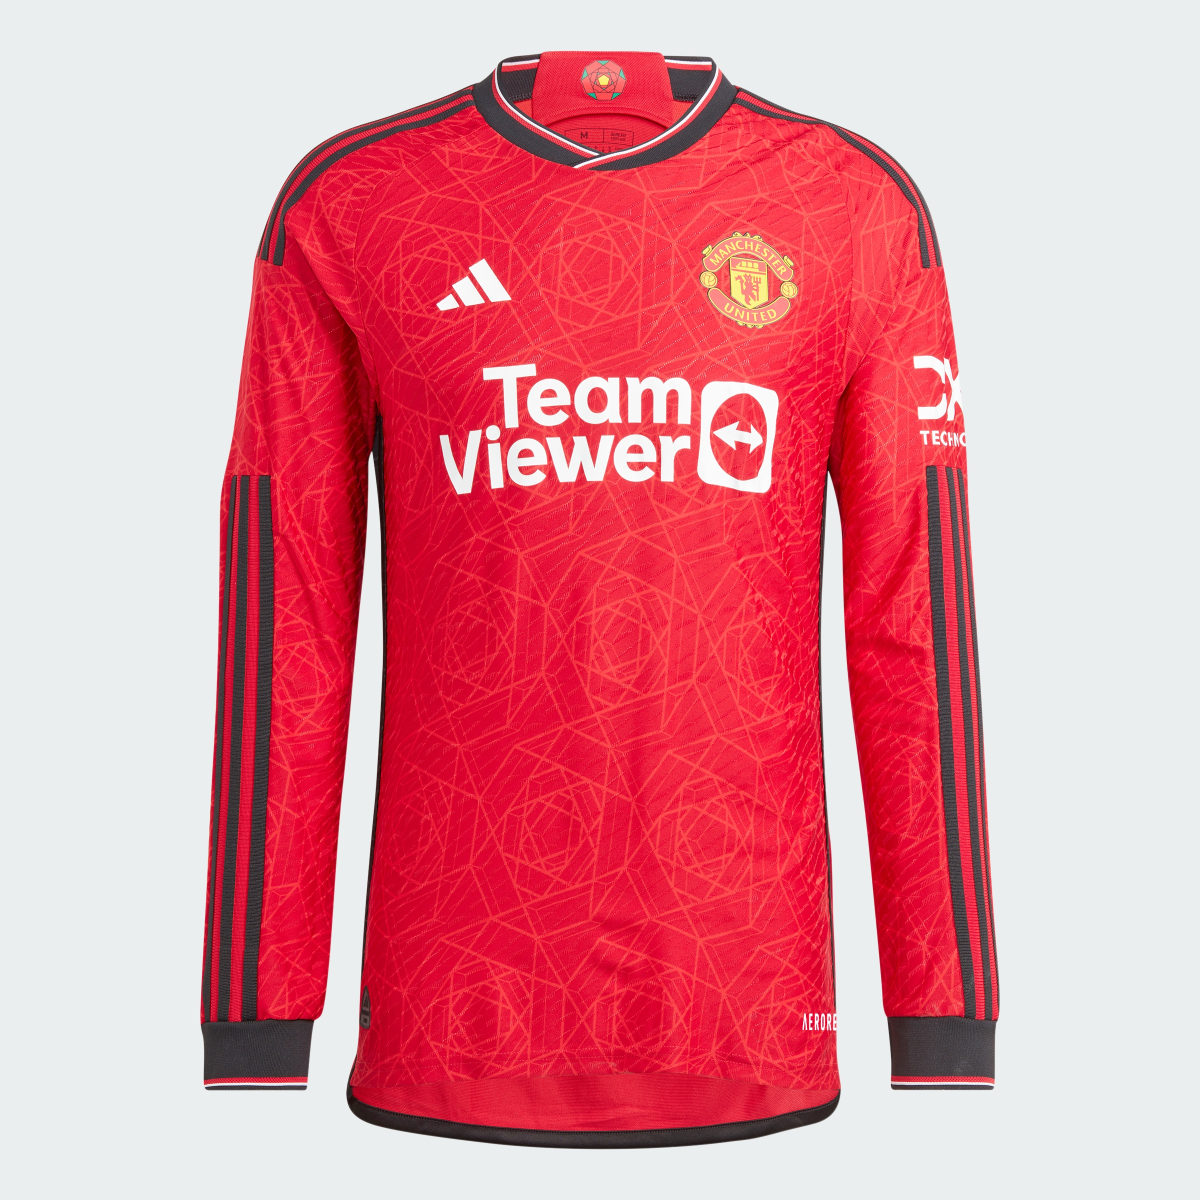 Adidas Maillot manches longues Domicile Manchester United 23/24. 5